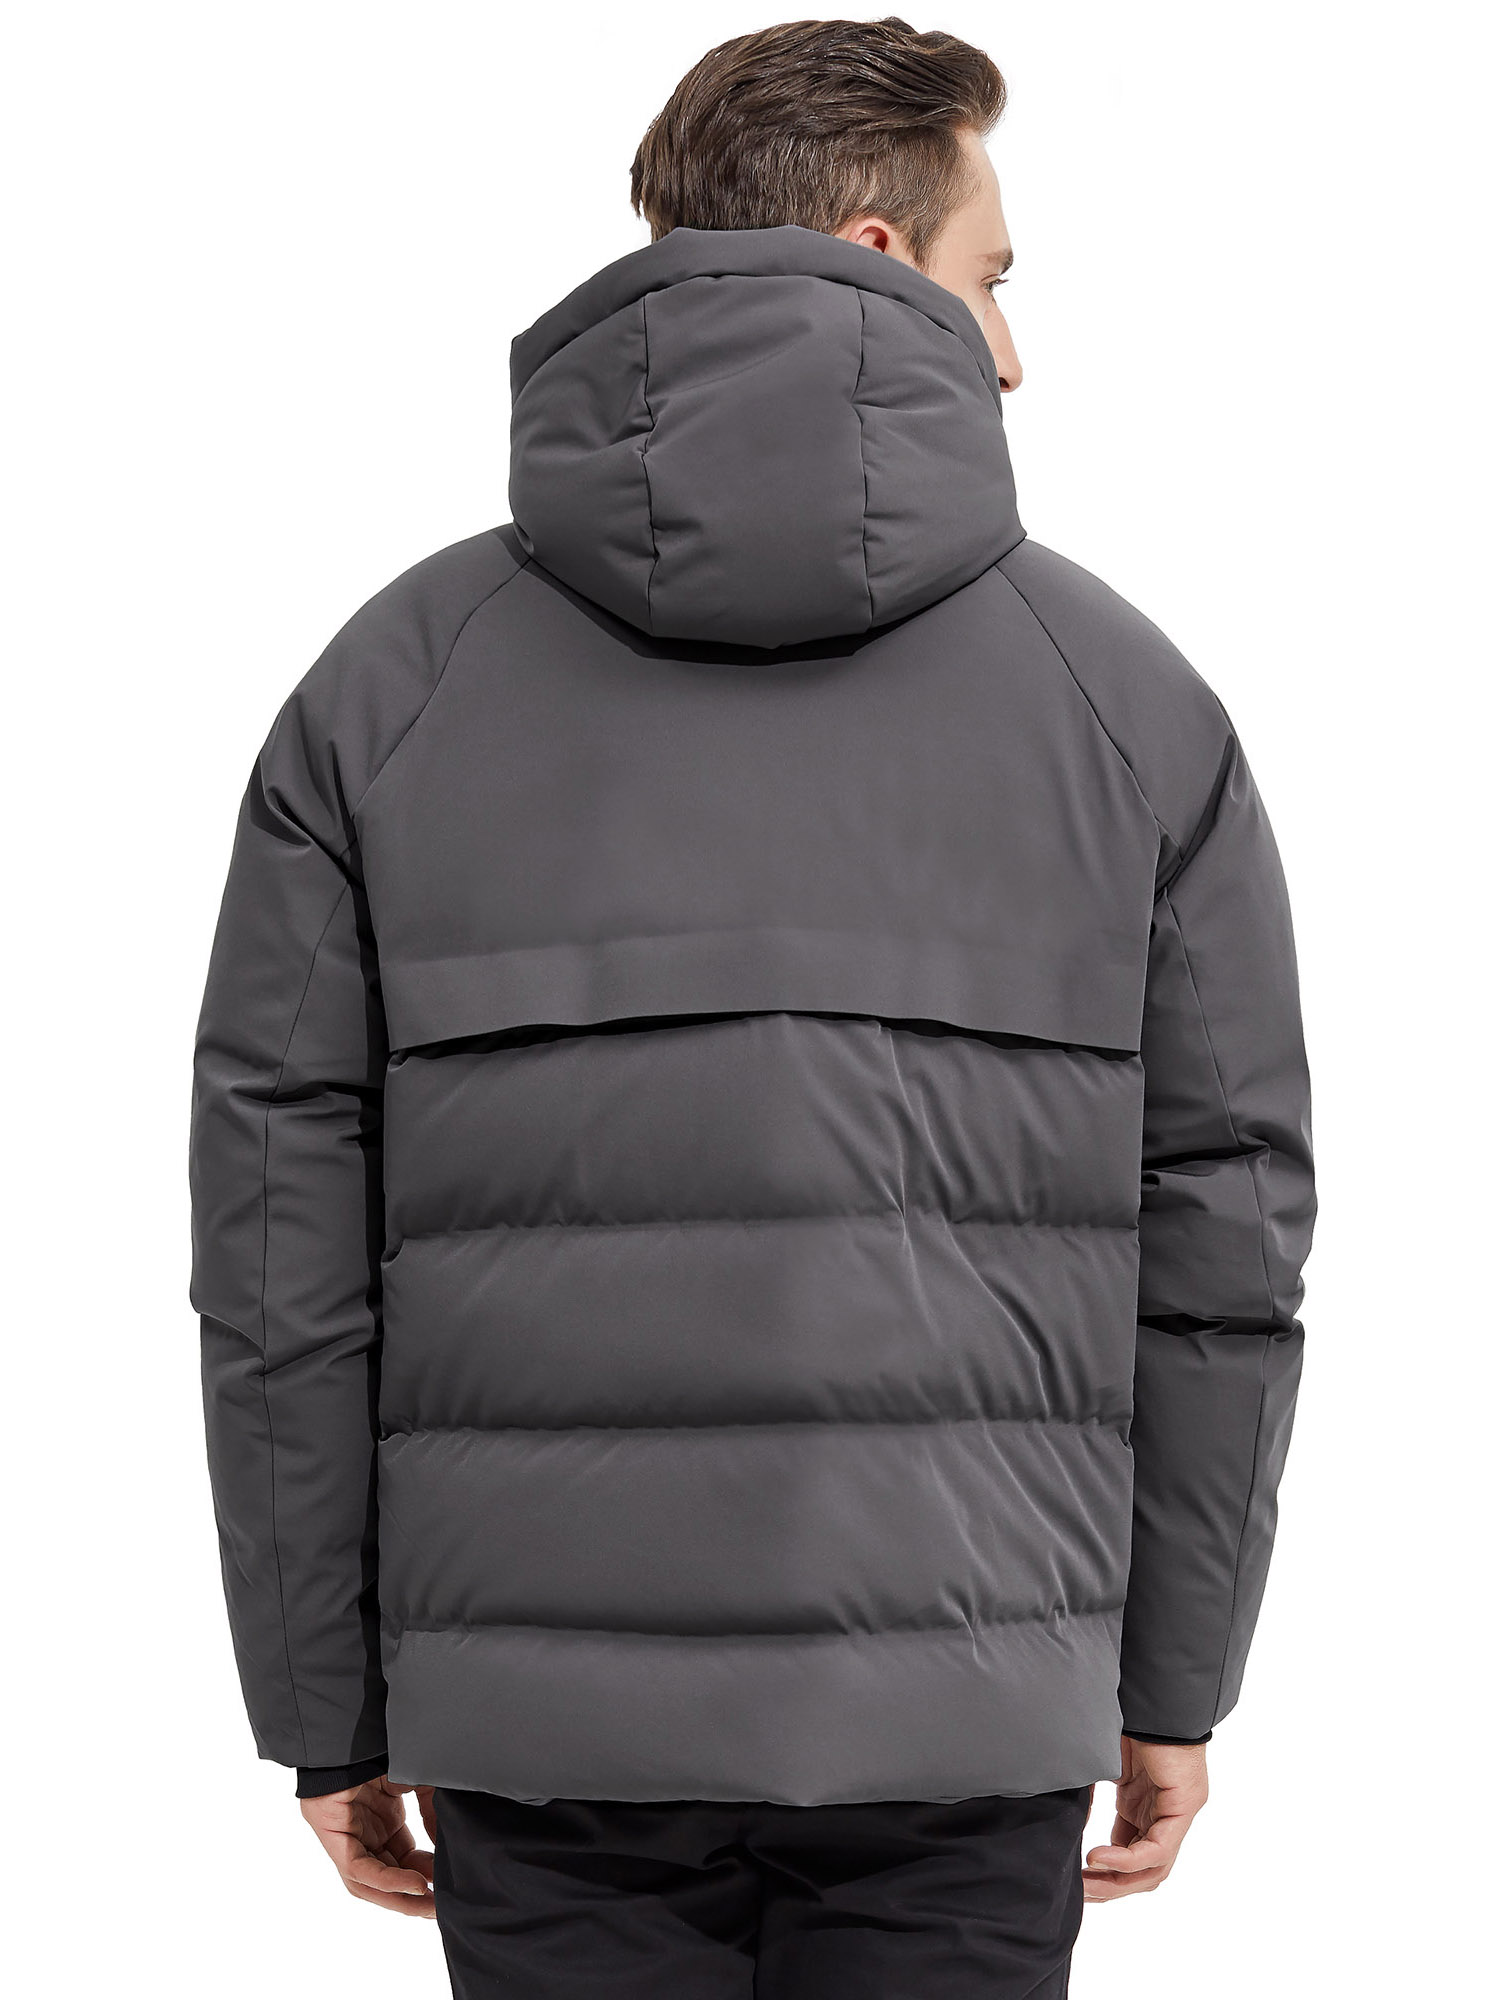 Orolay Men's Winter Down Jacket with Adjustable Drawstring Hood Ribbed Cuff - image 3 of 5